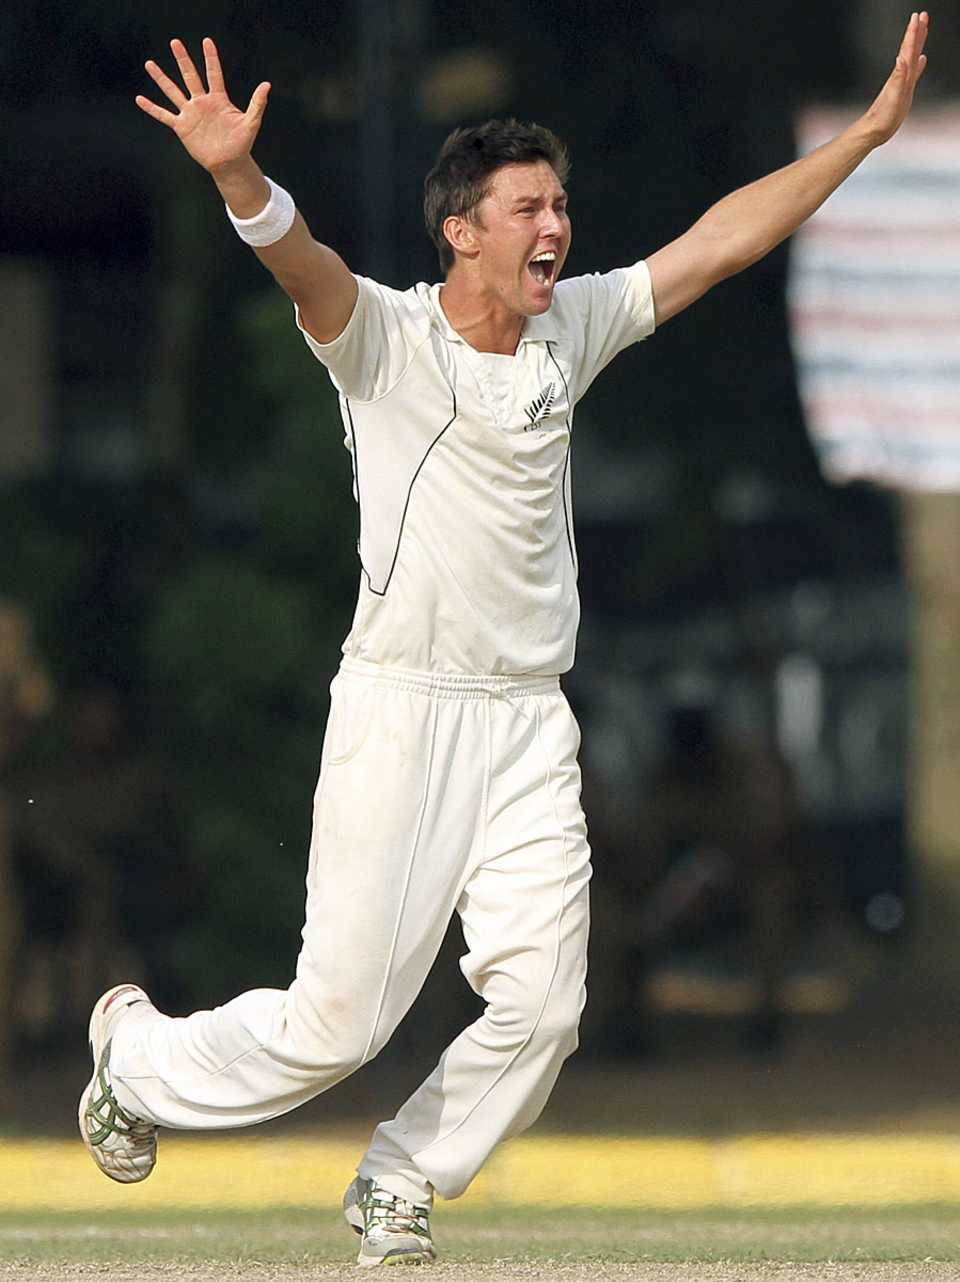 Trent Boult took the final wicket to seal the win